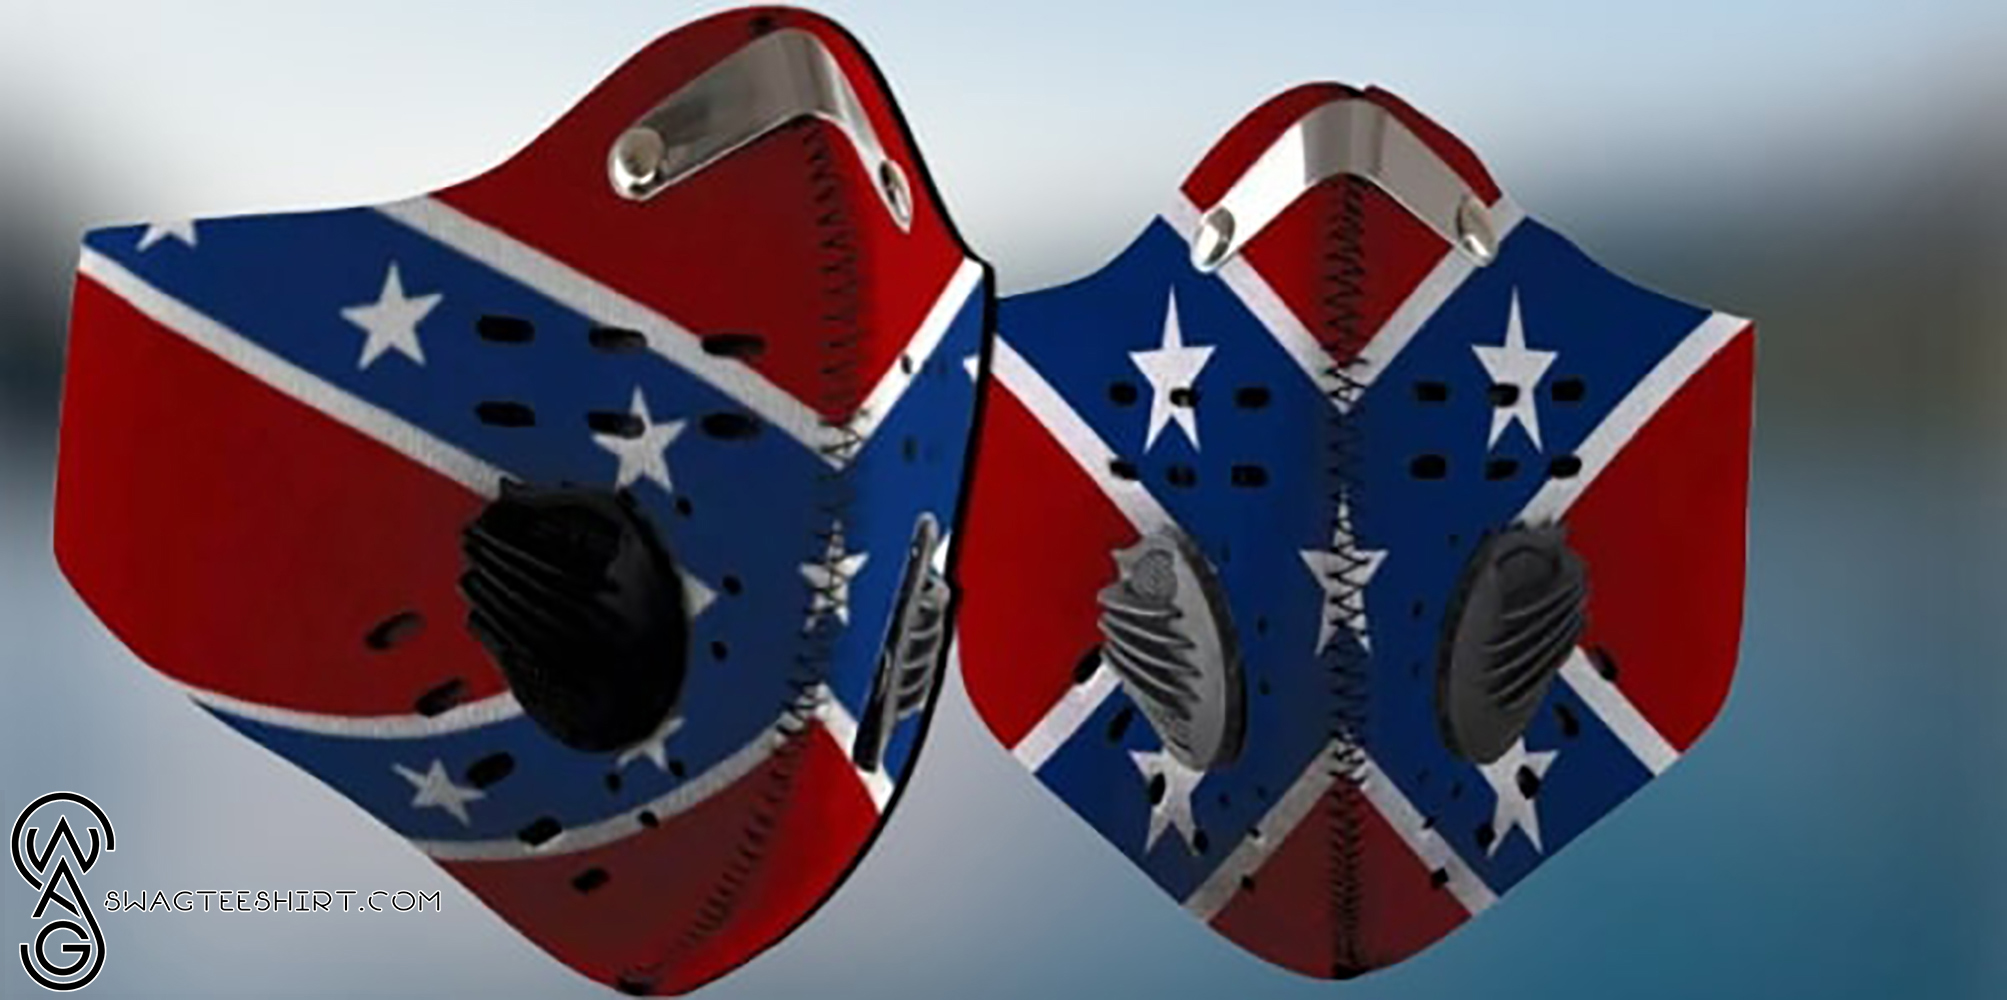 Flags of the confederate states of america filter activated carbon face mask